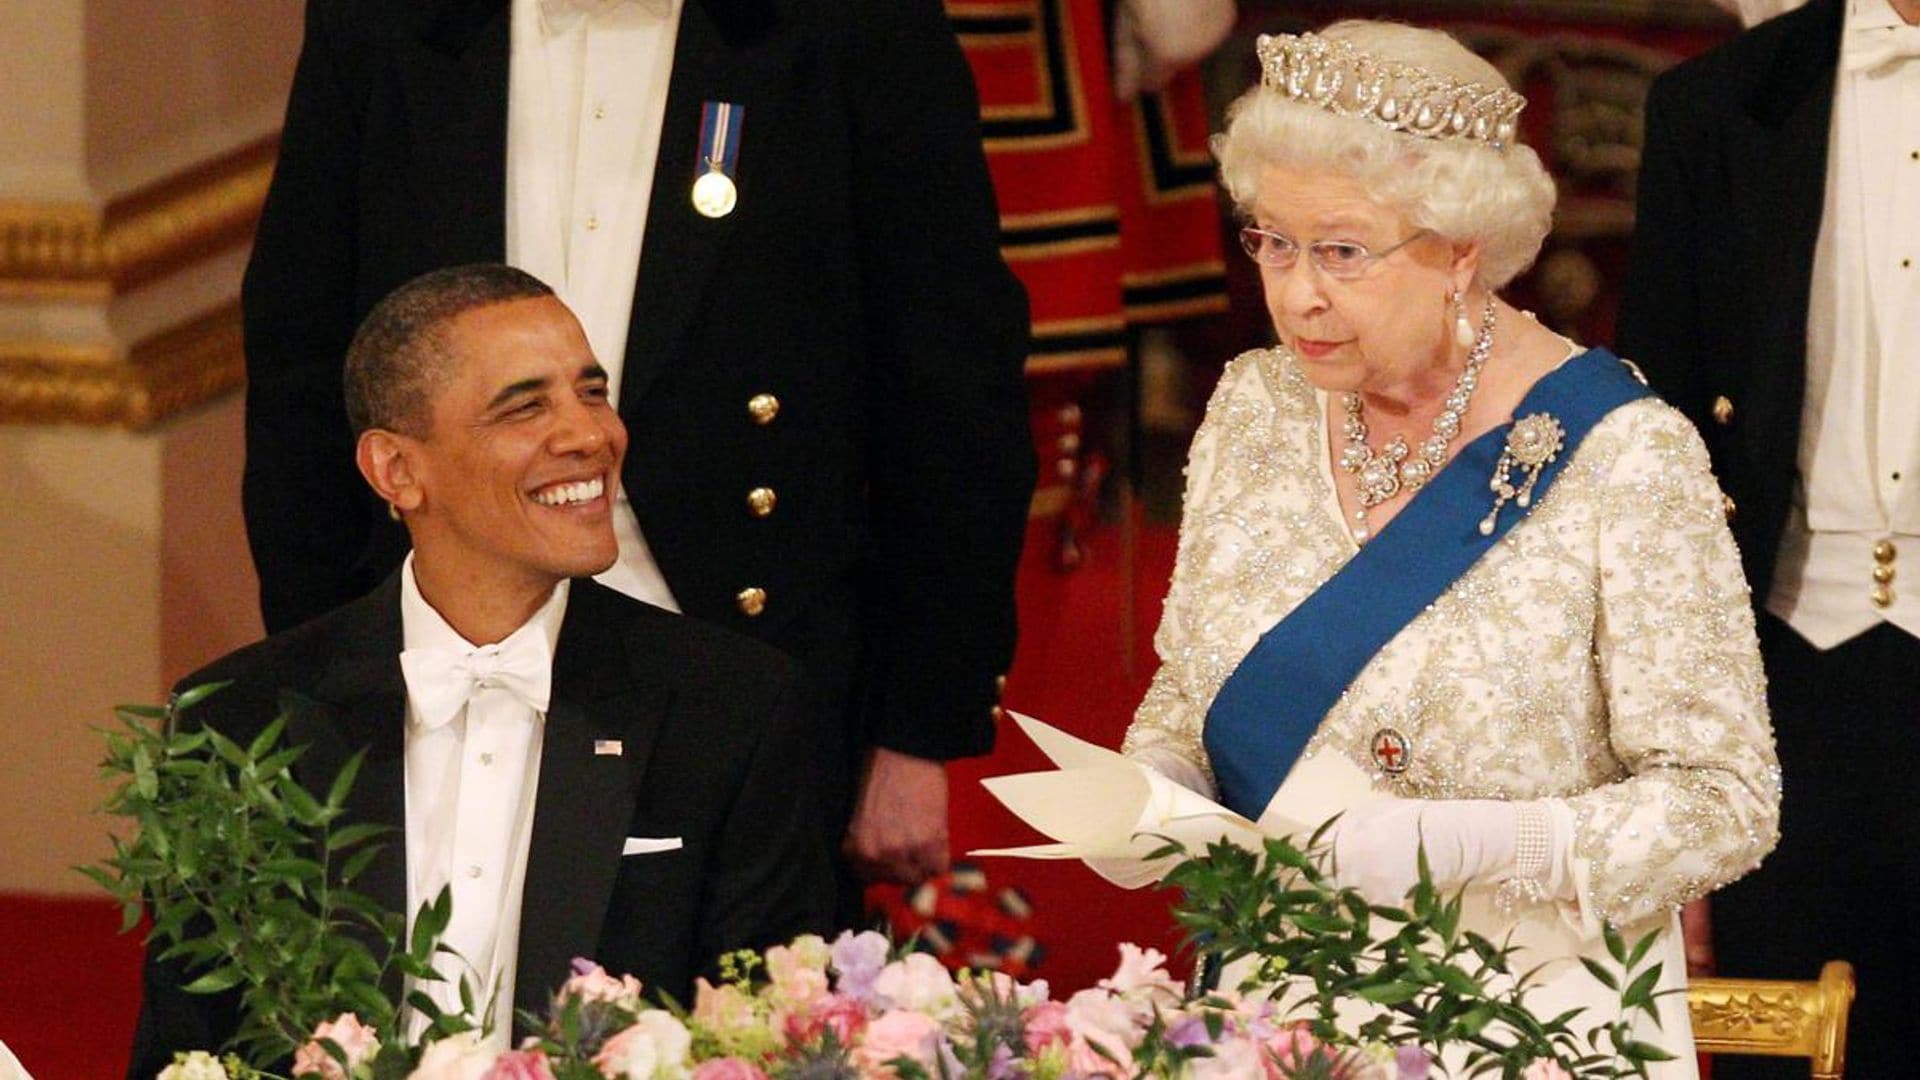 President Barack Obama reveals Queen Elizabeth II ‘quietly’ invited his two daughters for tea at the palace